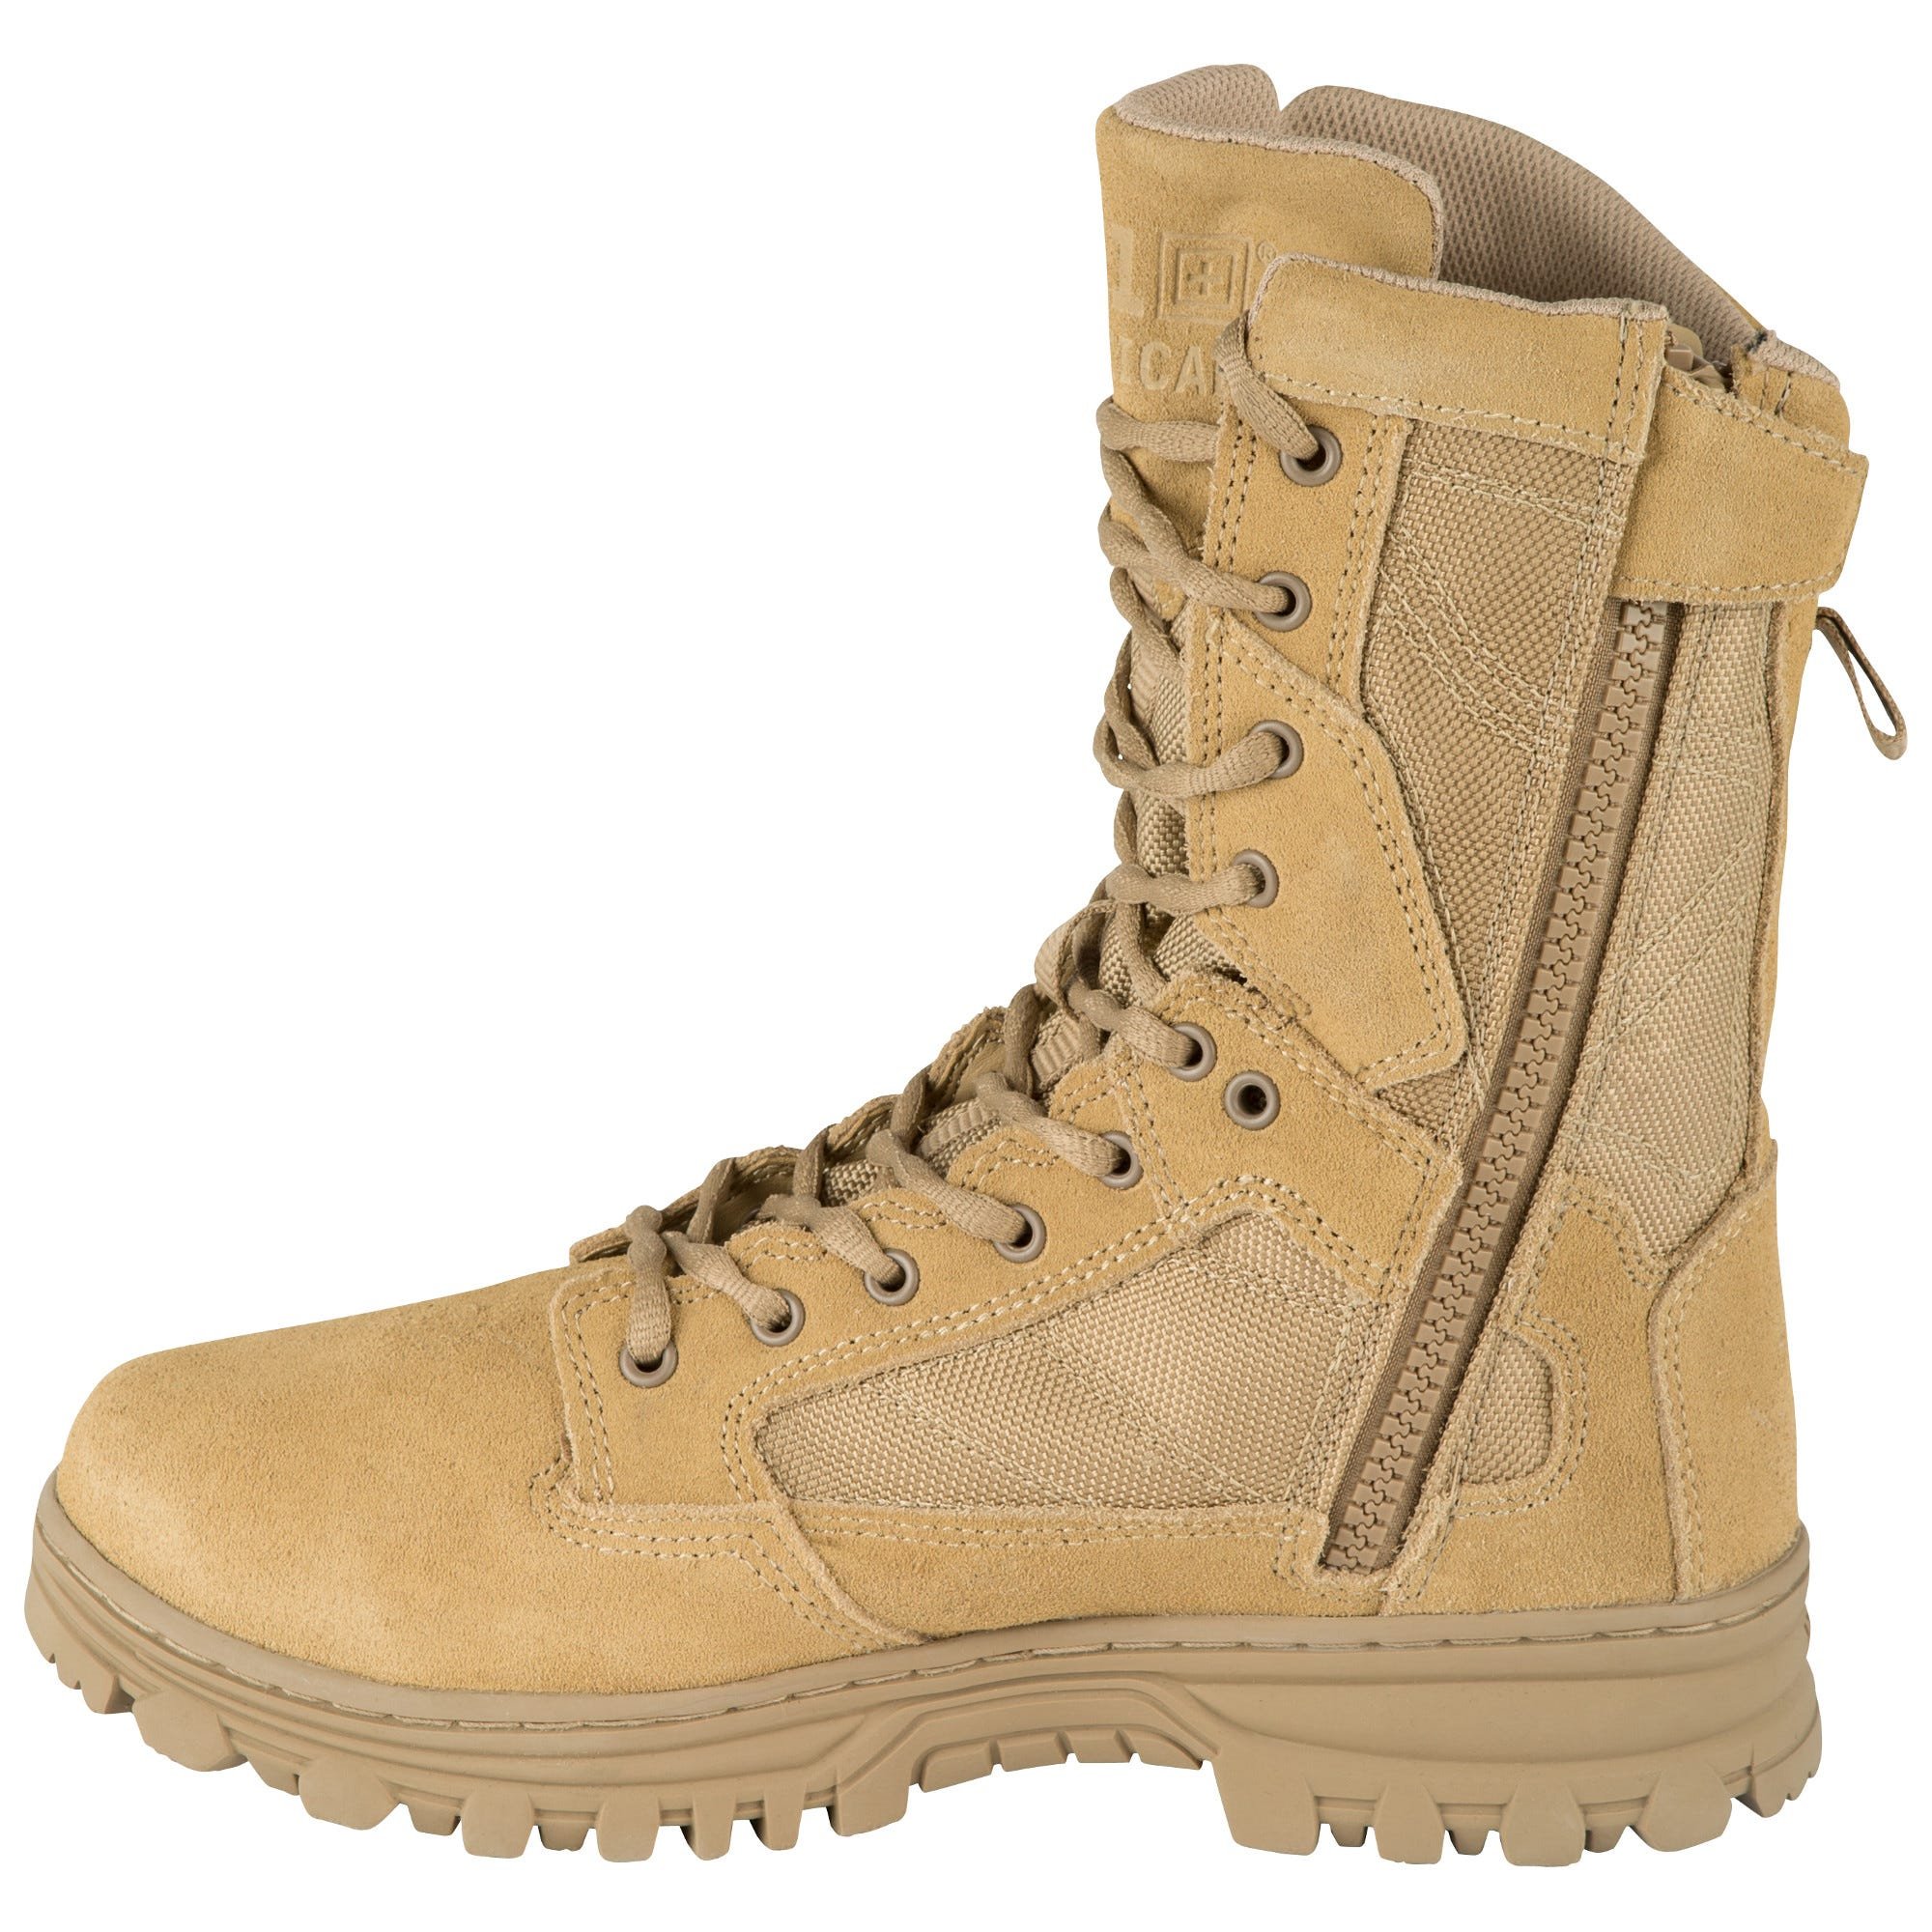 5.11 Work Gear EVO 8-Inch Waterproof Boots, Oil/Slip-Resistant, OrthoLite Insole, Coyote, 6.5/Regular, Style 12347 - image 4 of 4